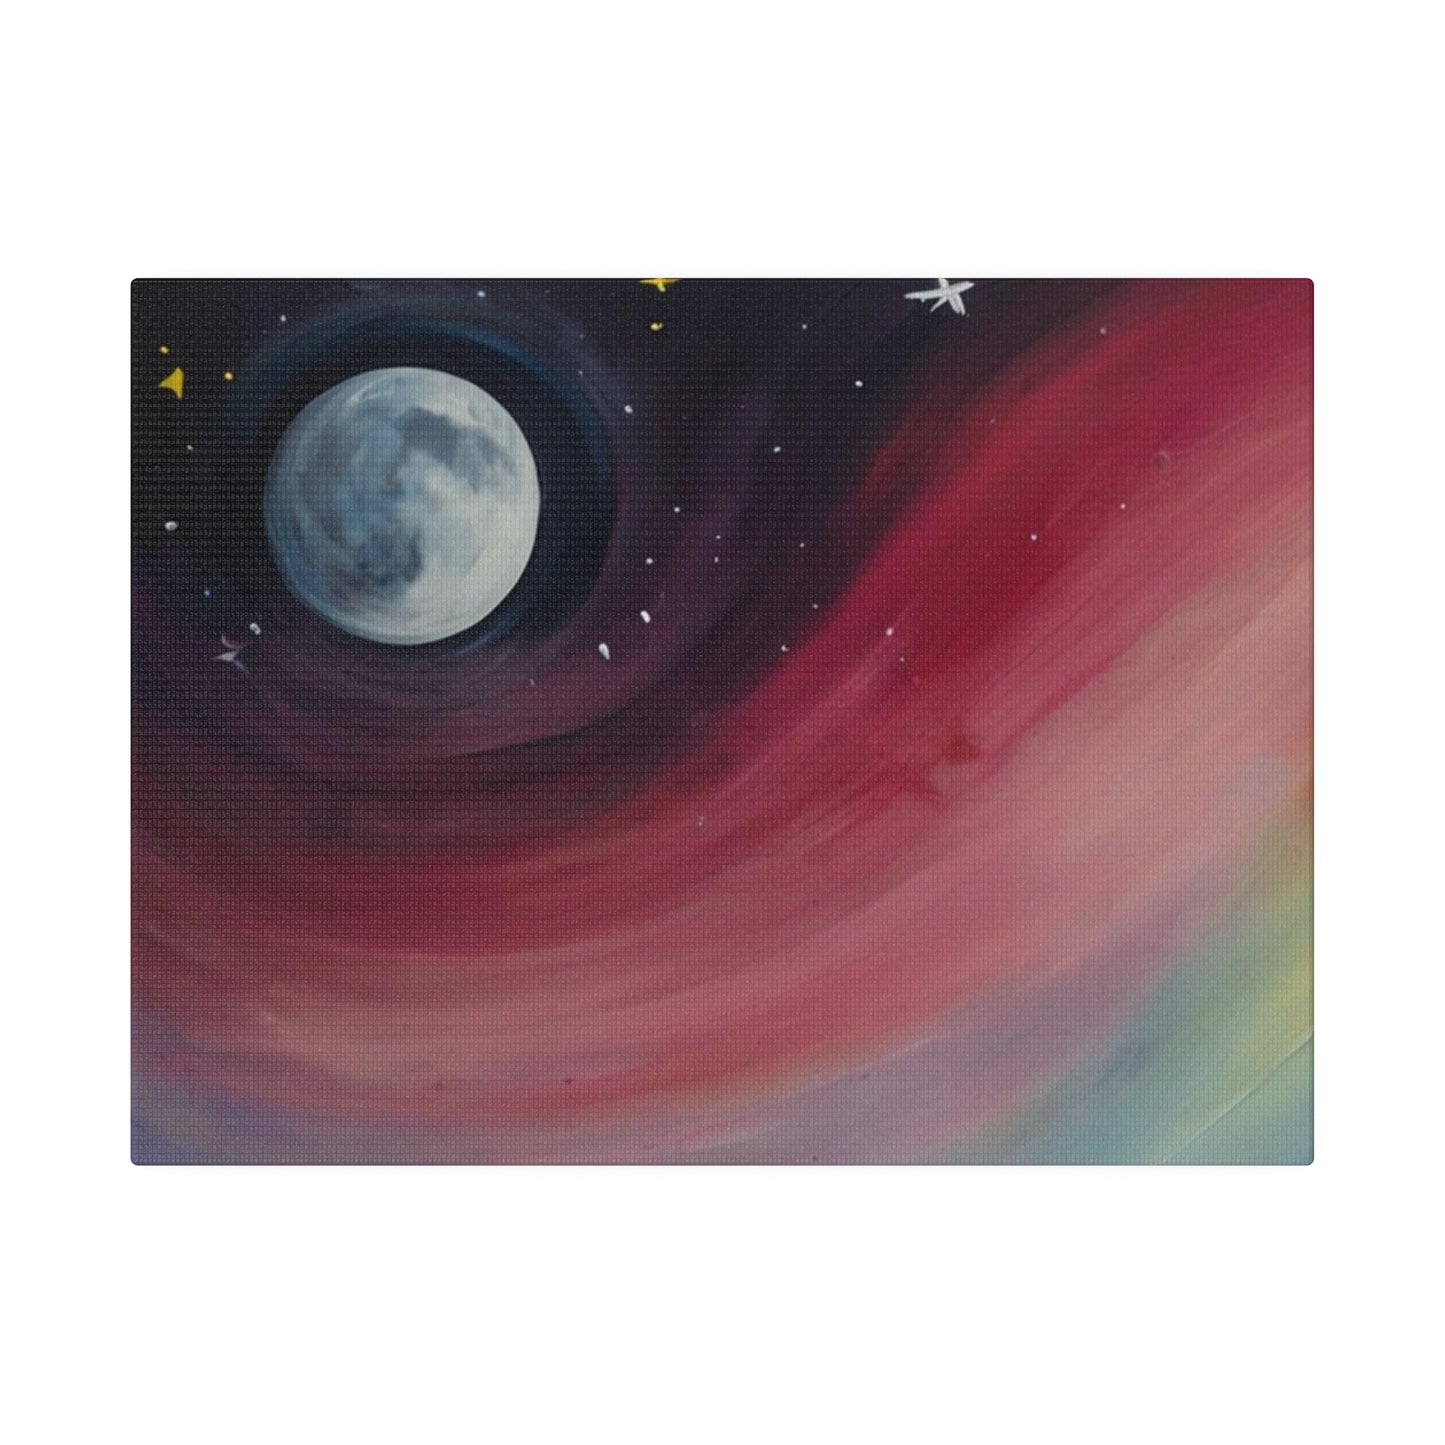 Colourful Moon and Stars - Matte Canvas, Stretched, 0.75"